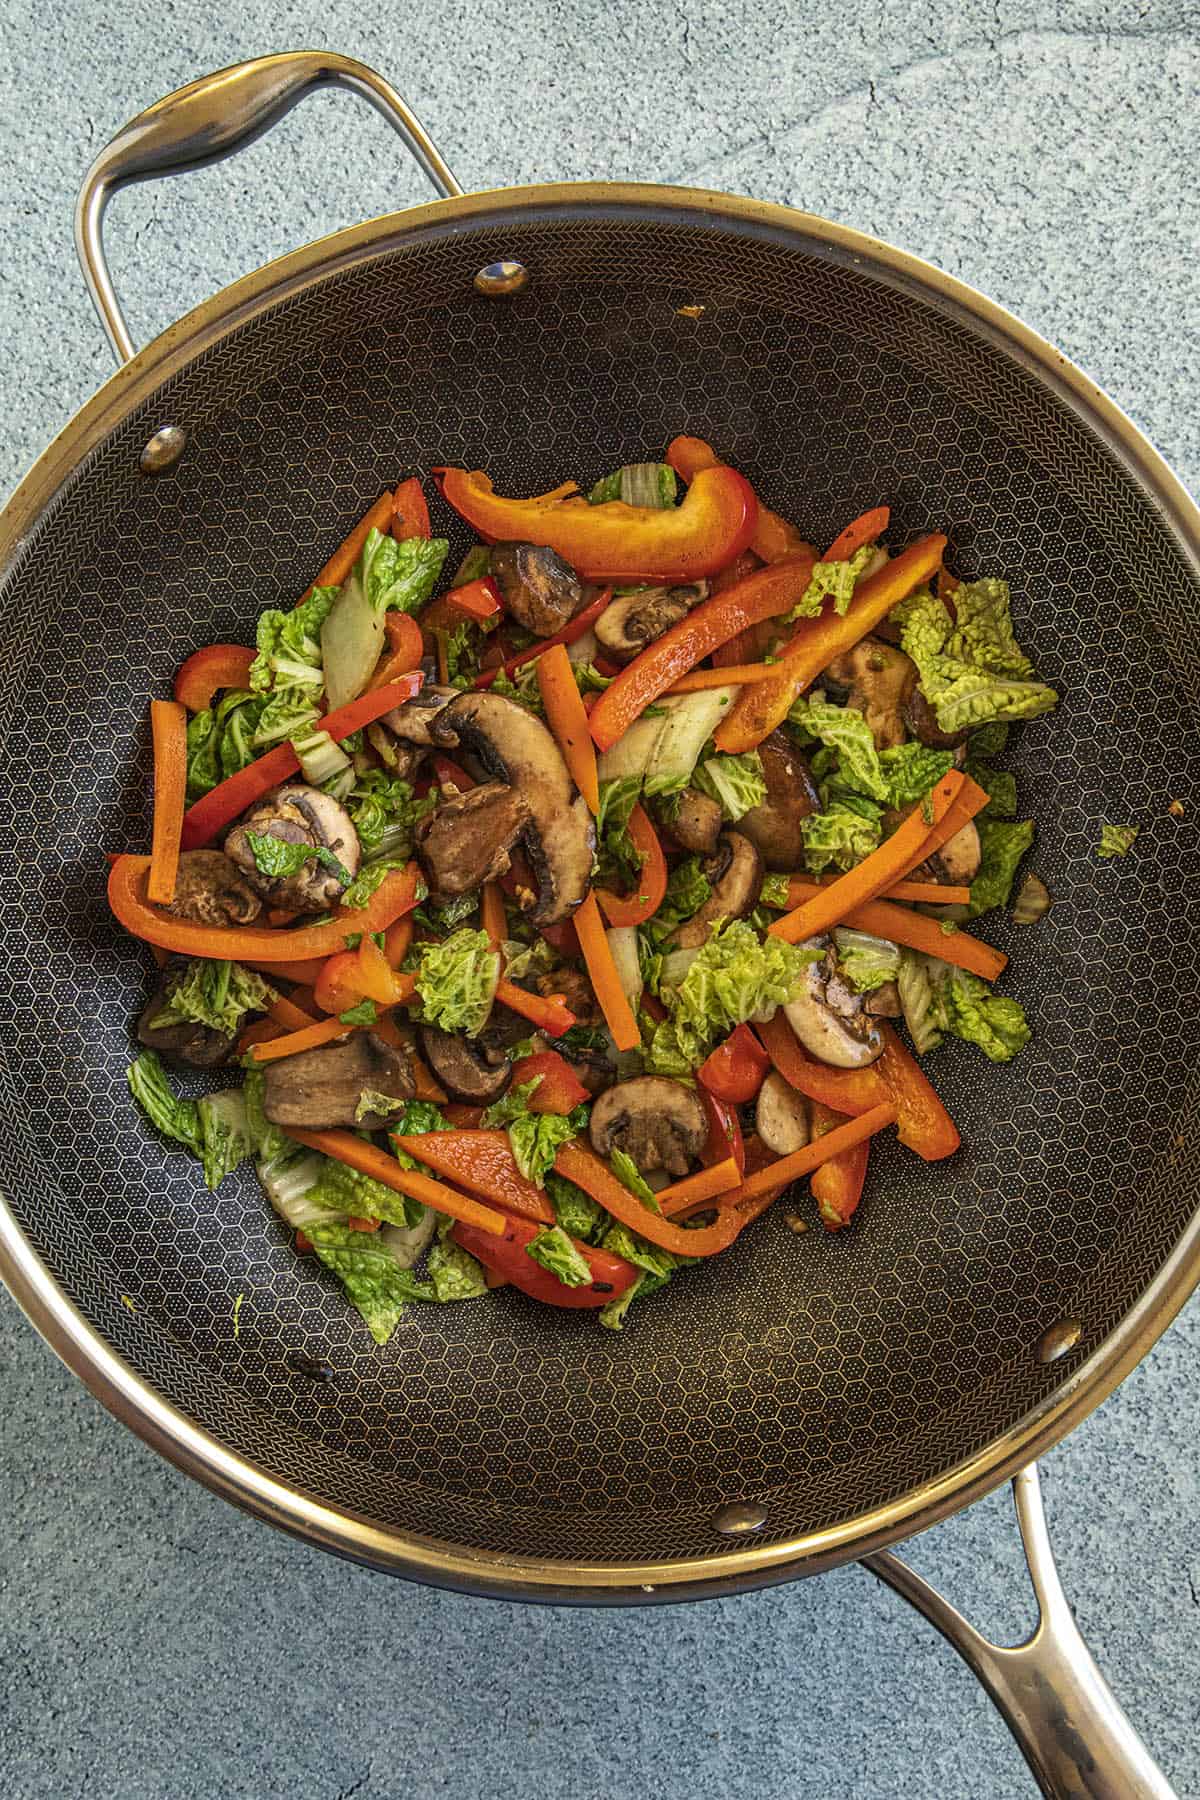 Stir frying the first round of vegetables in a hot pan